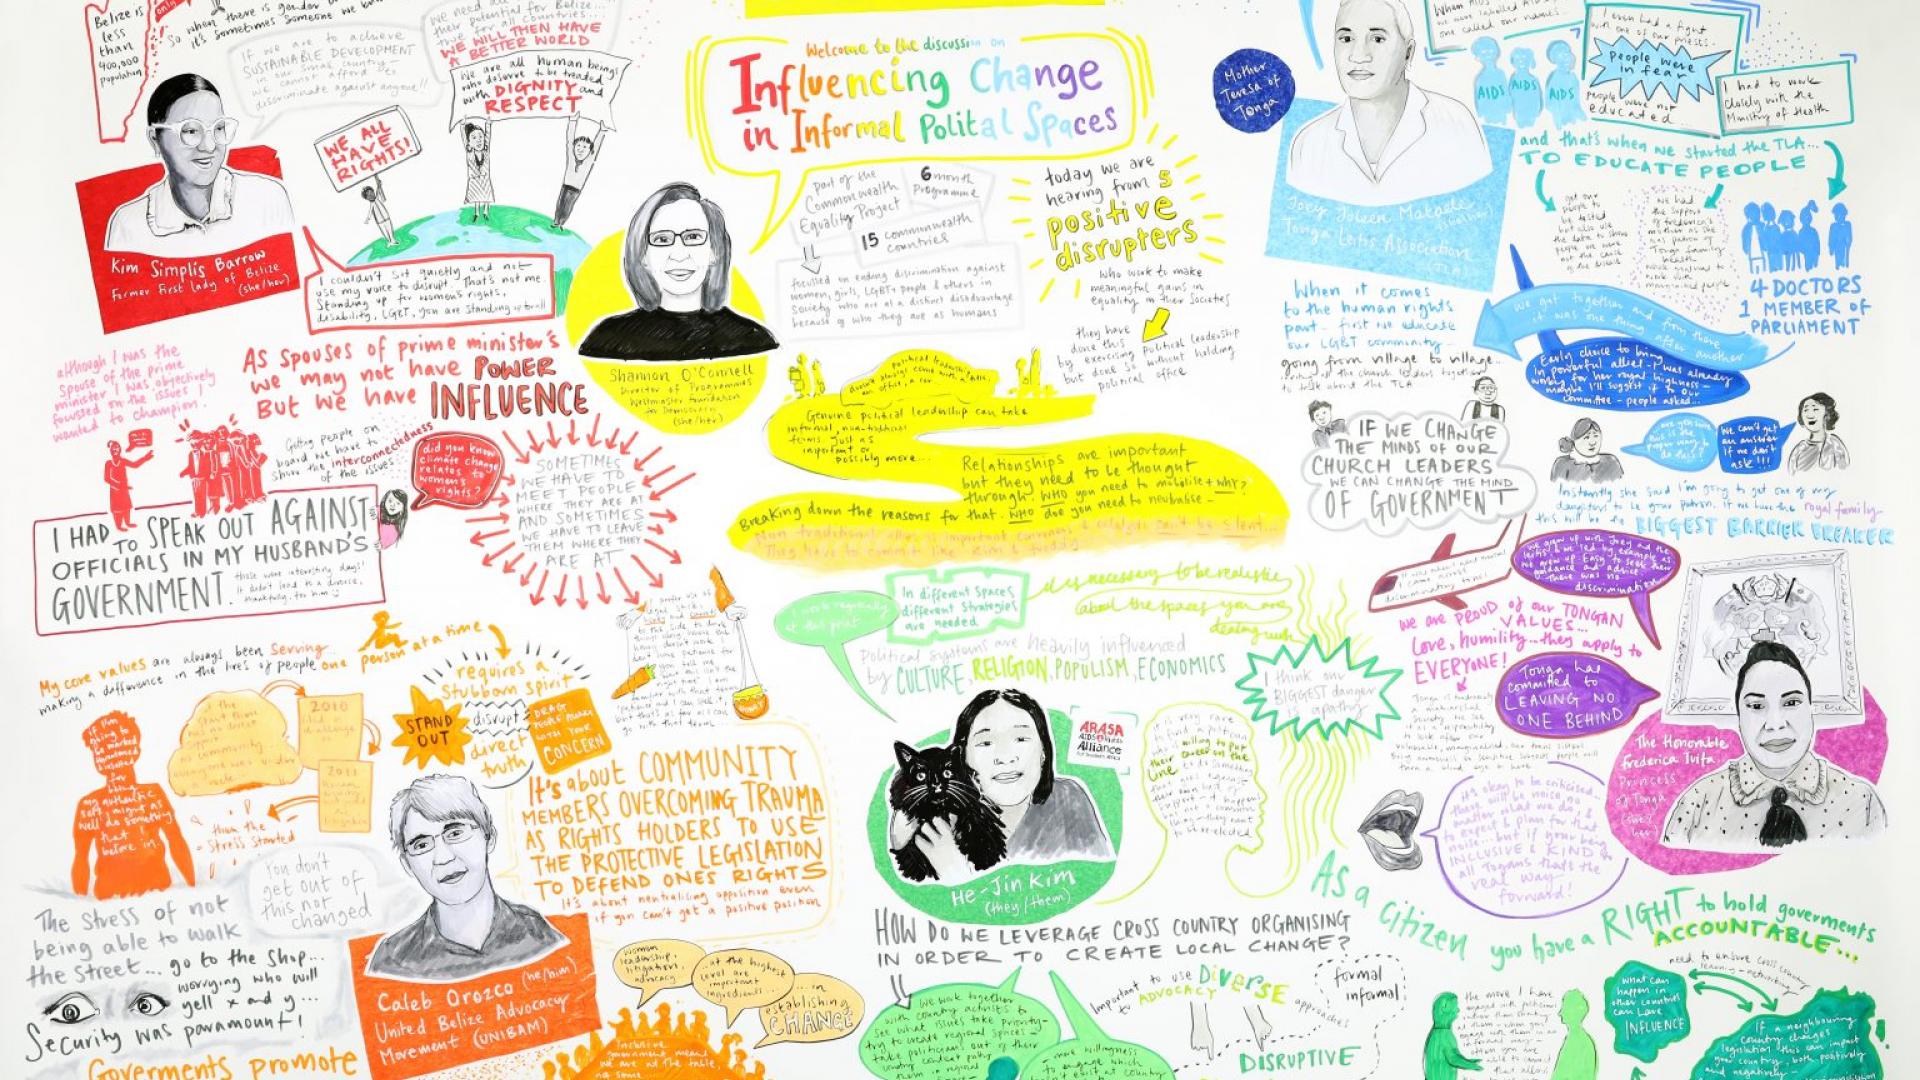 Visual minutes of the influencing change event